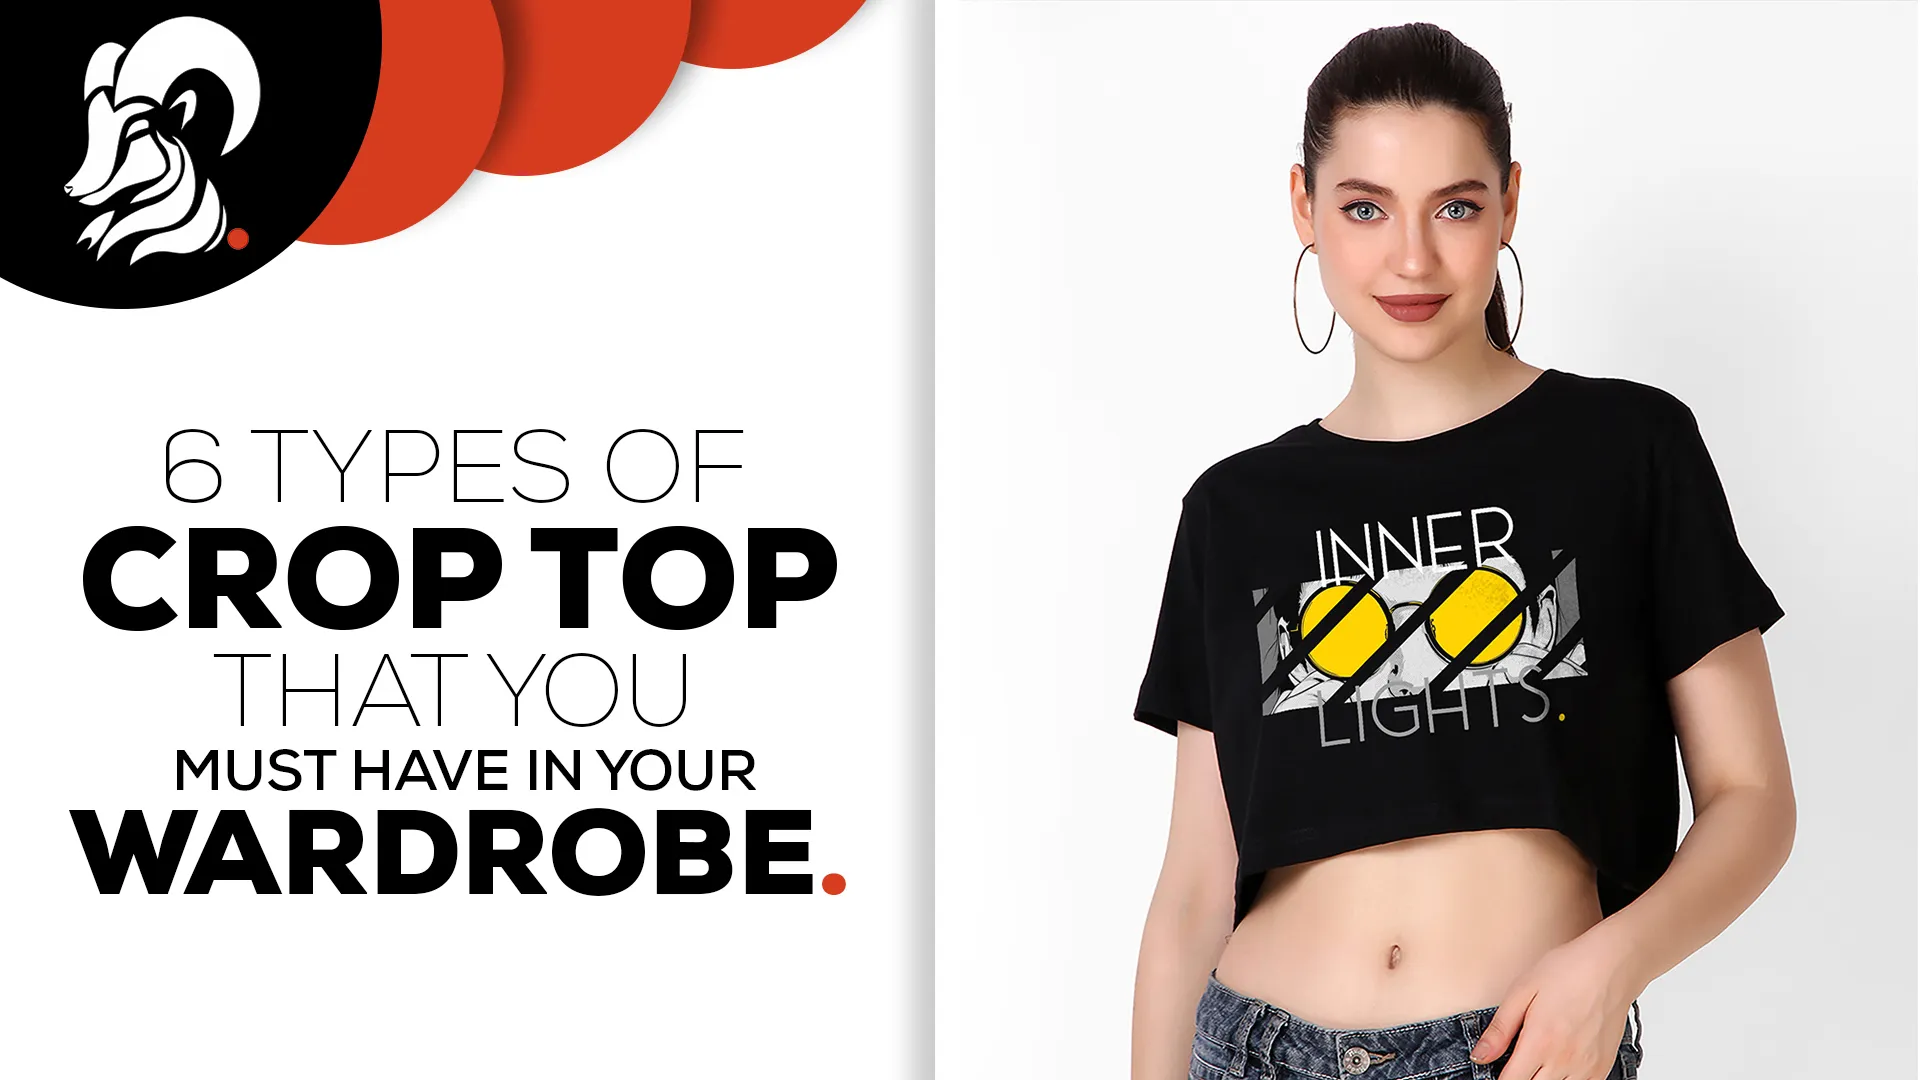 6 Types Of Crop Tops That Every Fashionista Should Own